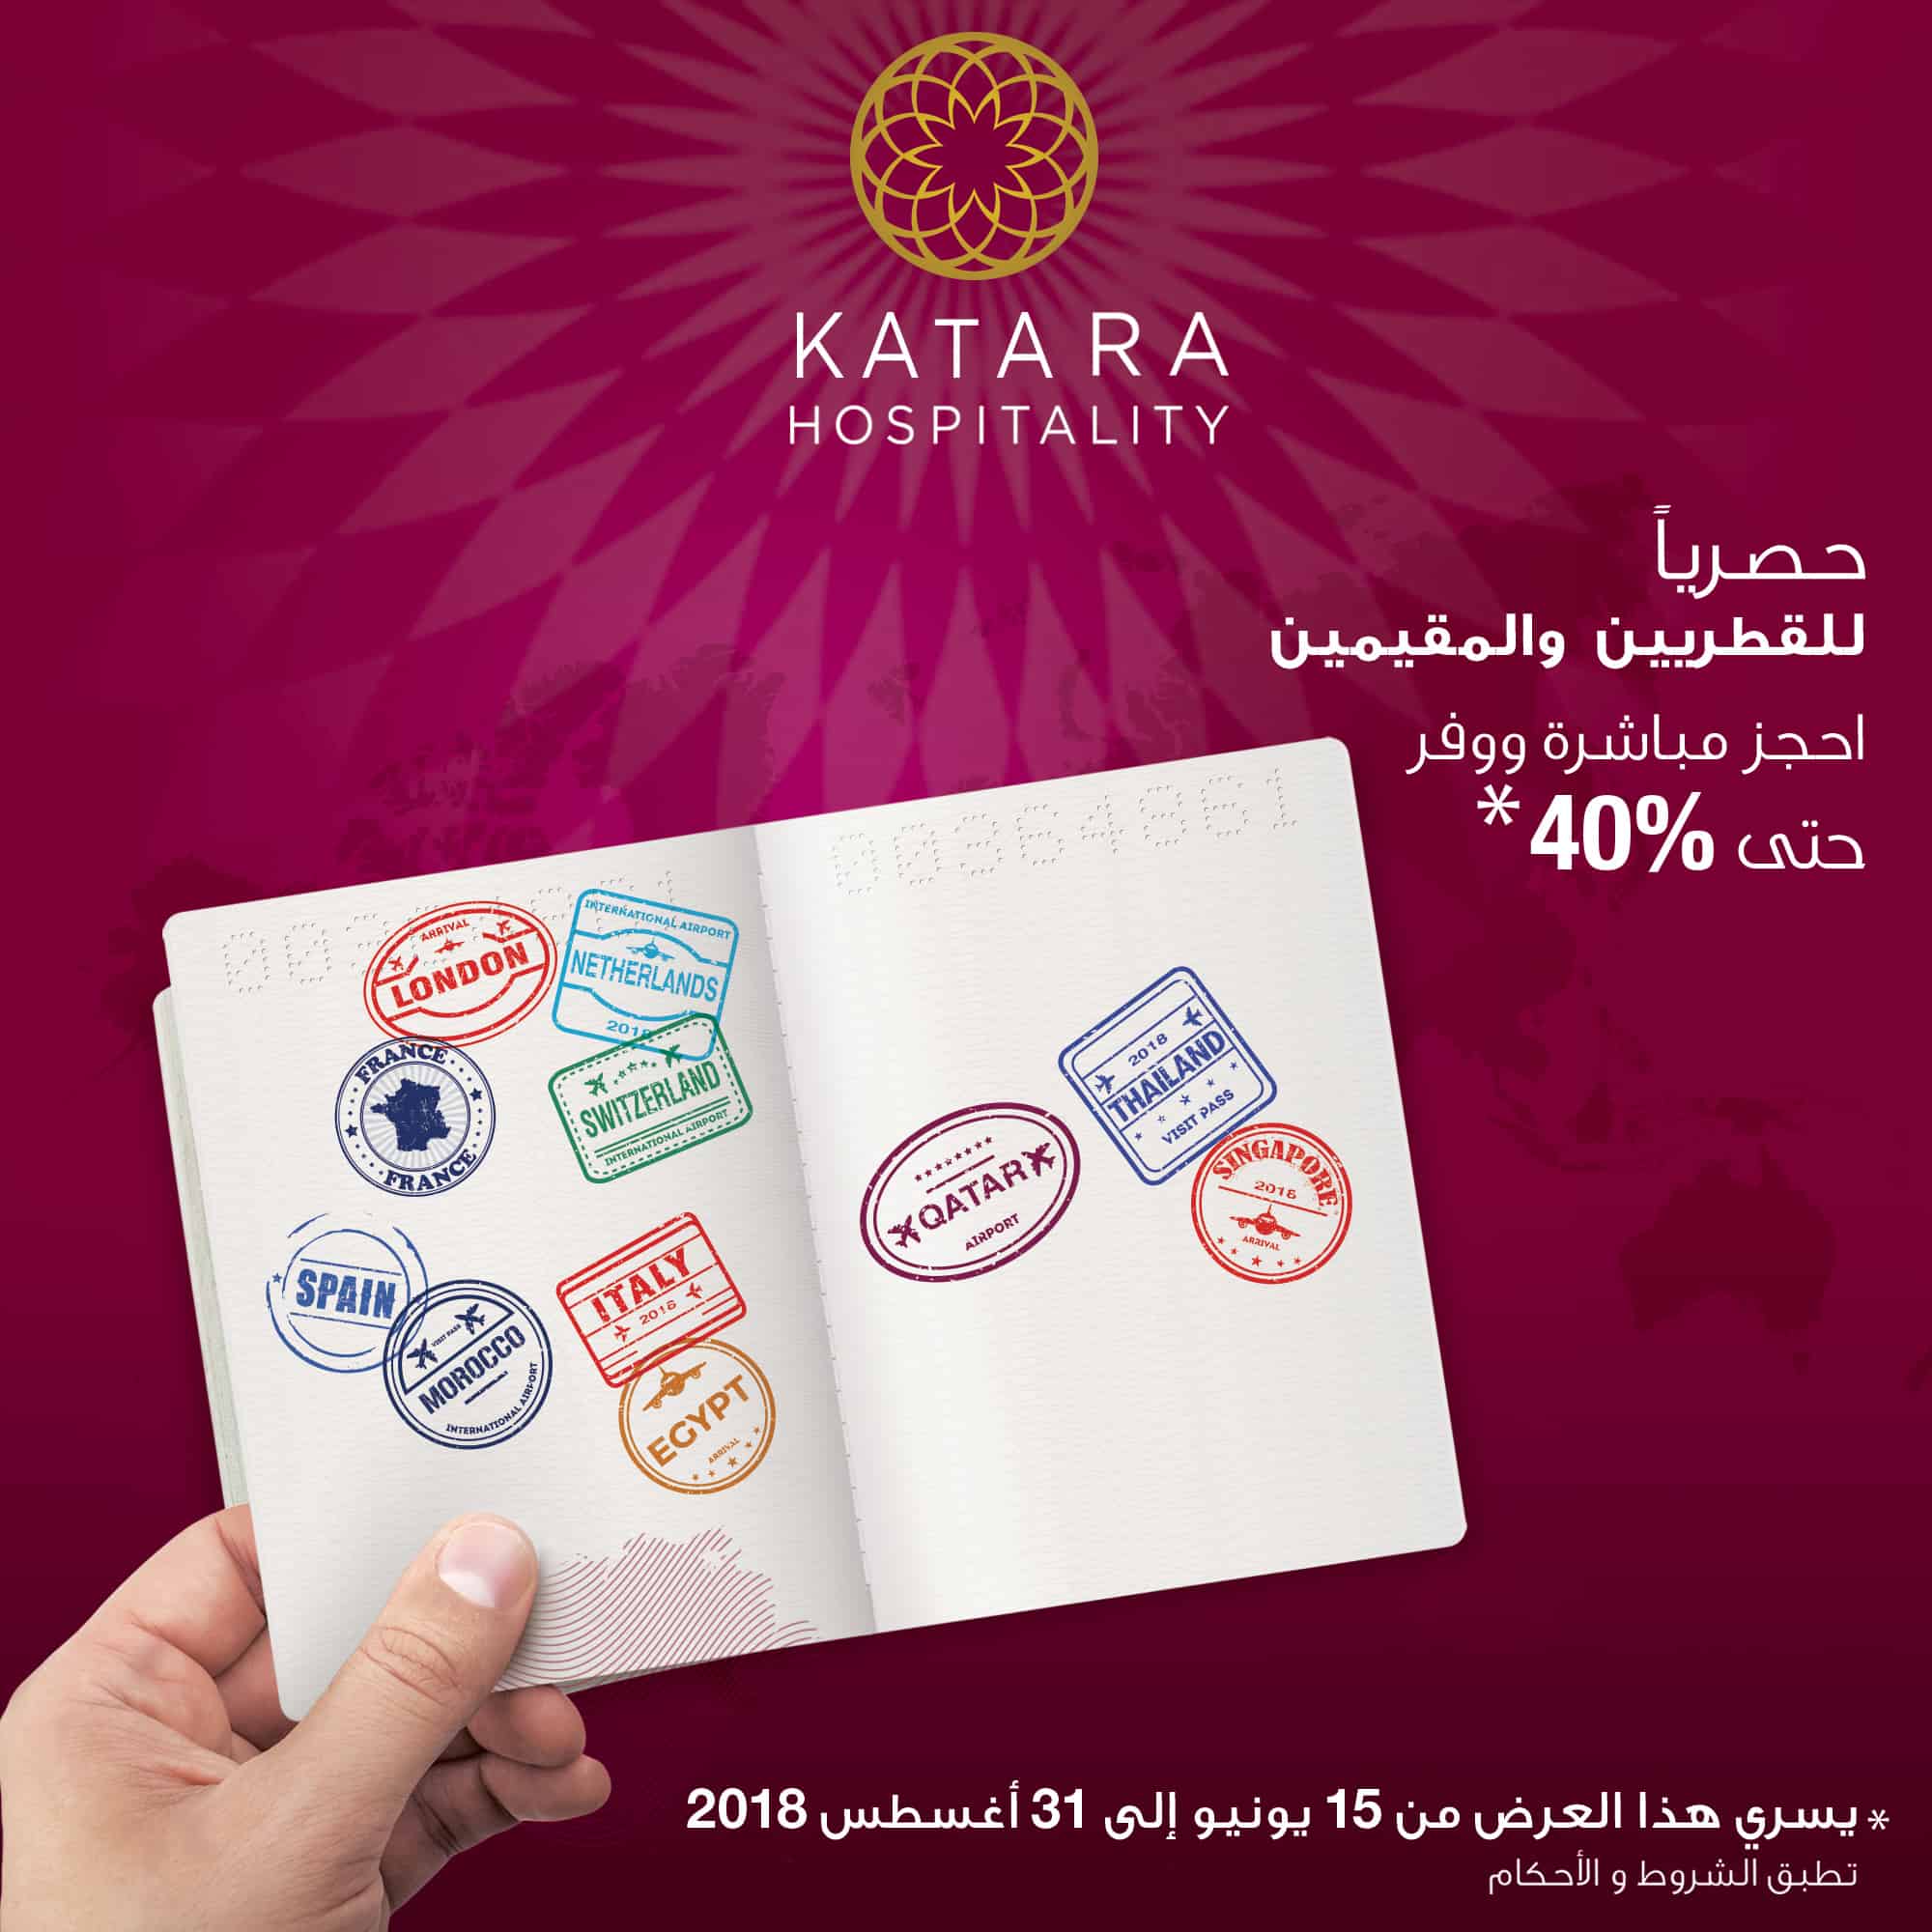 Katara hospitality to launch exclusive package for Qatar nationals and residents